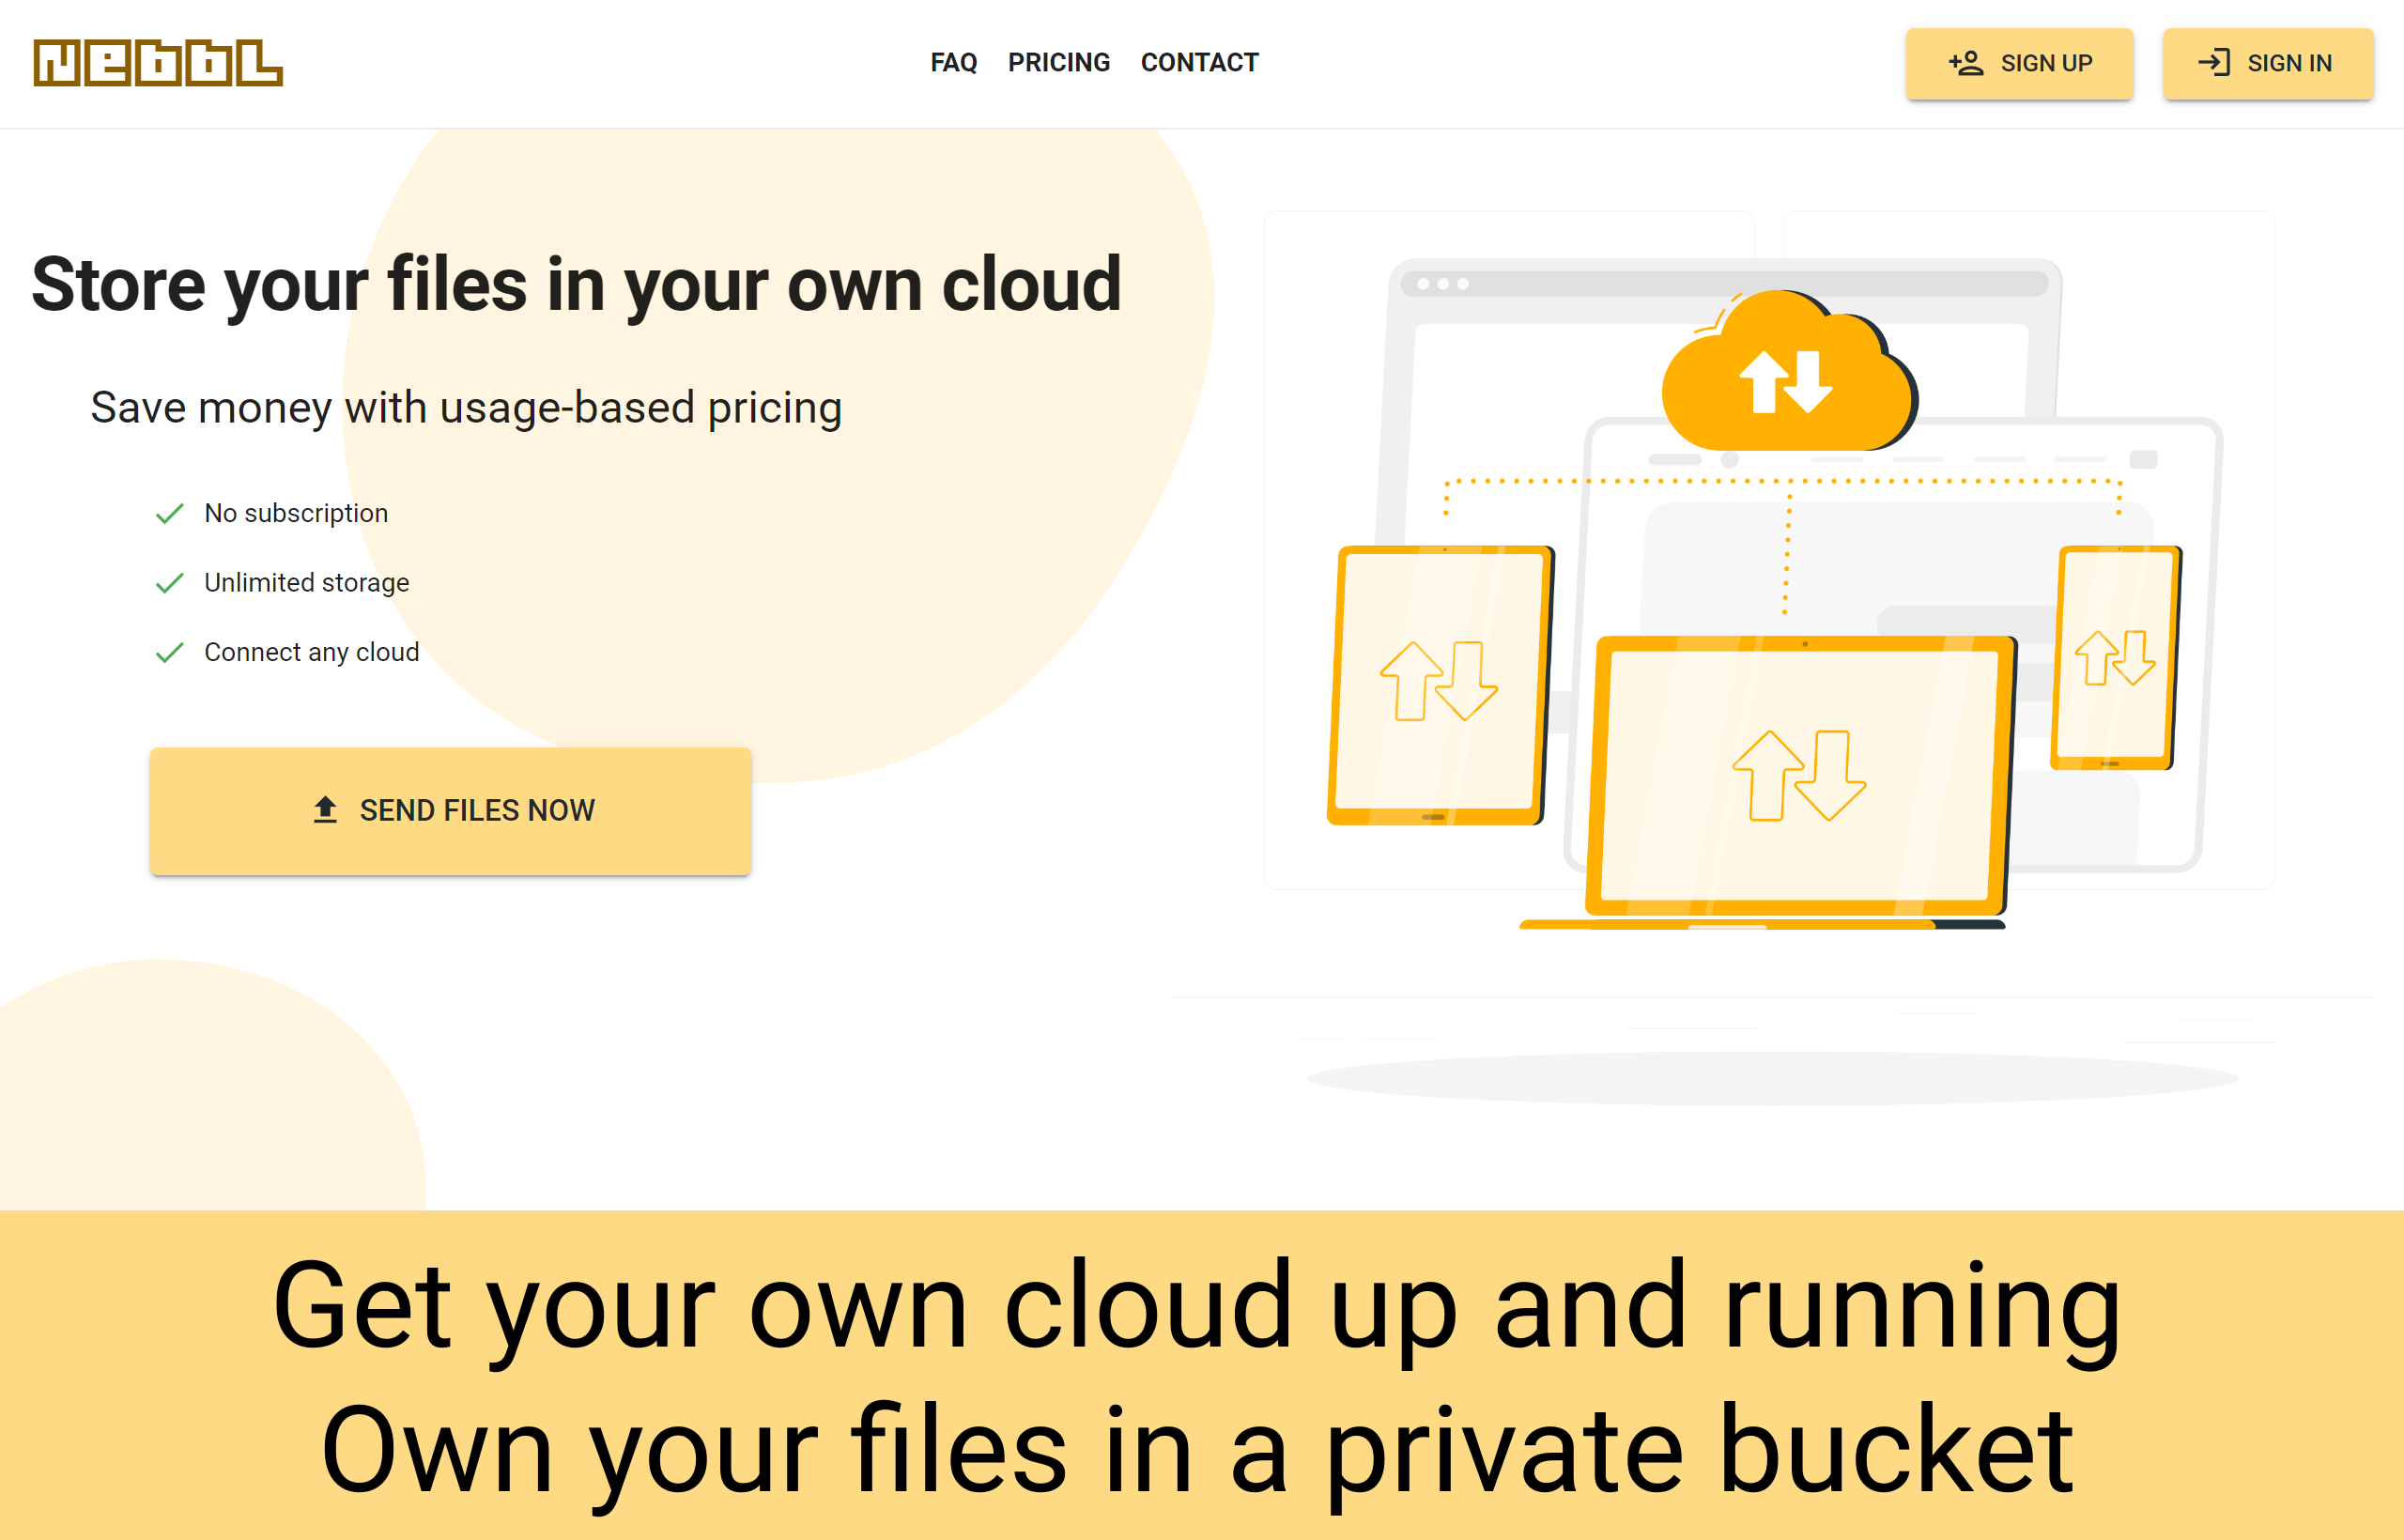 startuptile Nebbl-Revolutionize Storage: Own Your Cloud and Save Big